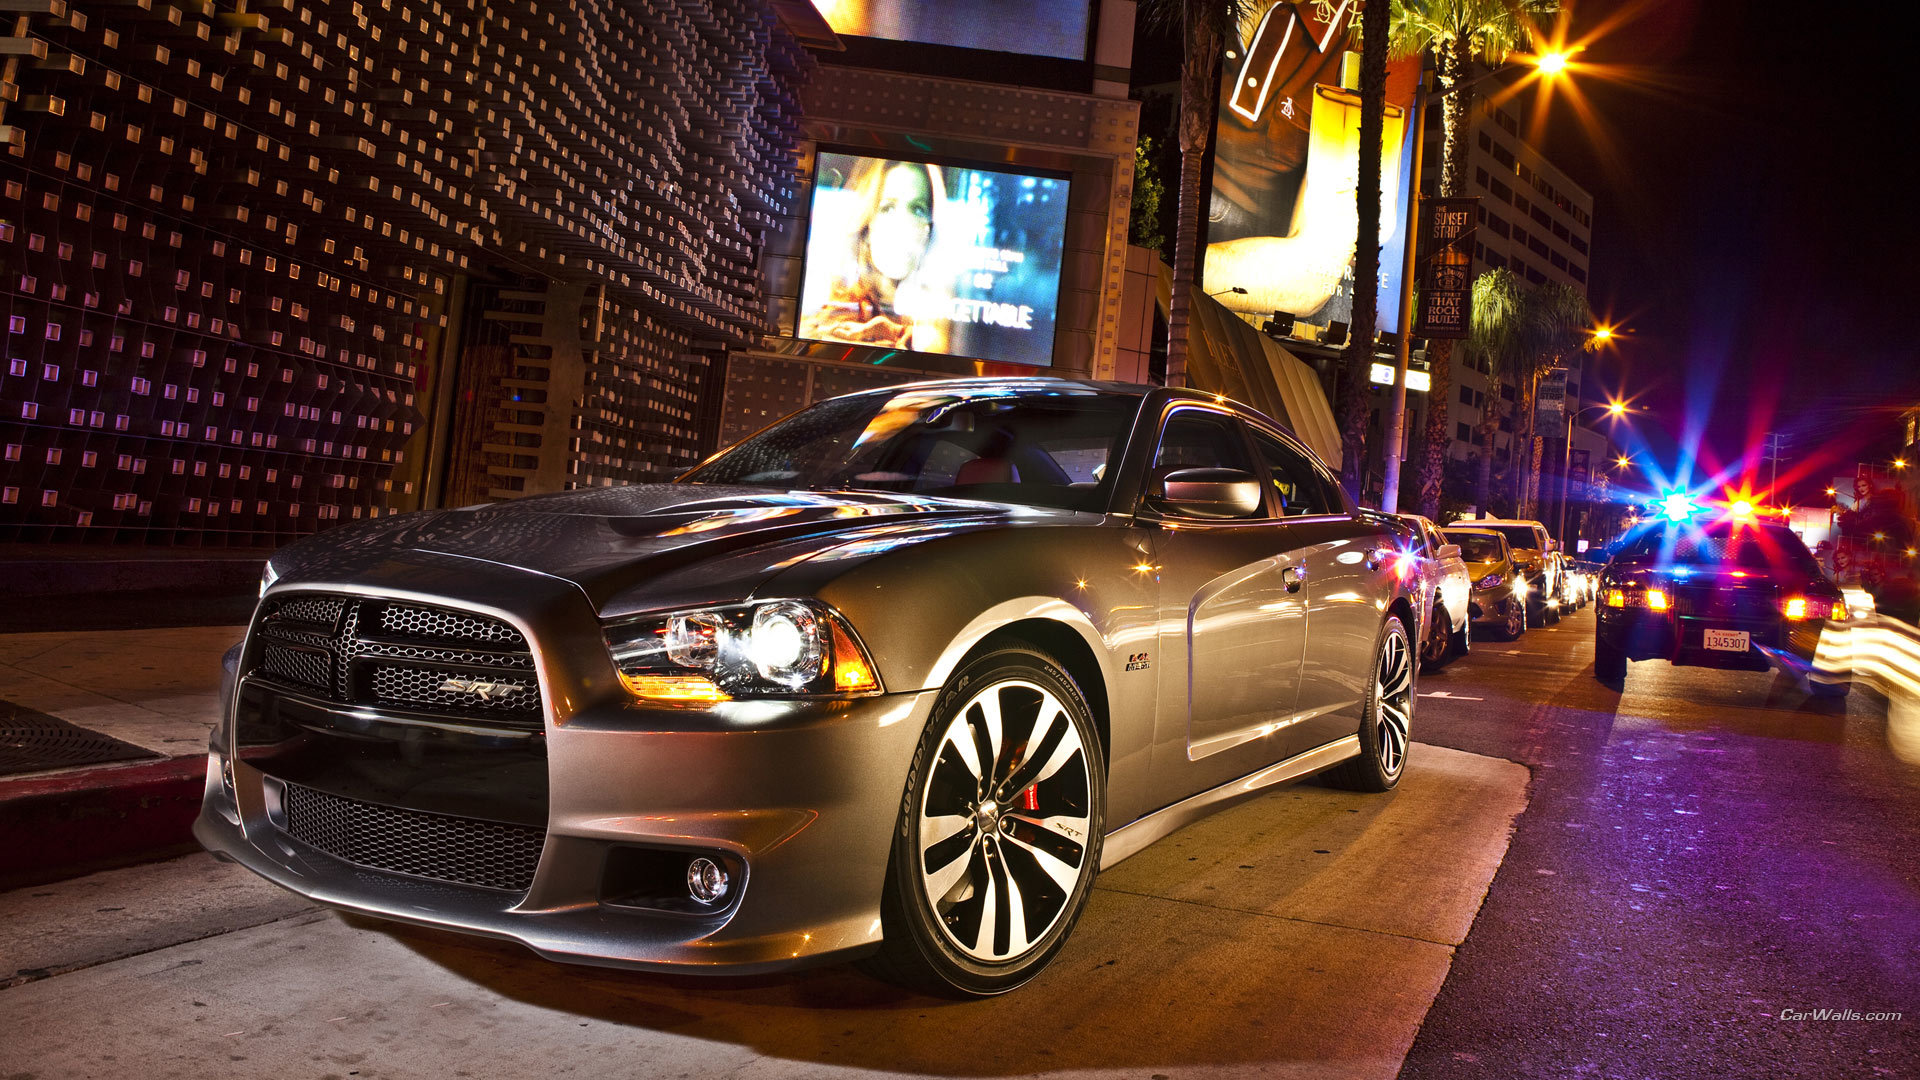 Awesome Dodge Charger Srt8 free wallpaper ID:277911 for hd 1920x1080 desktop